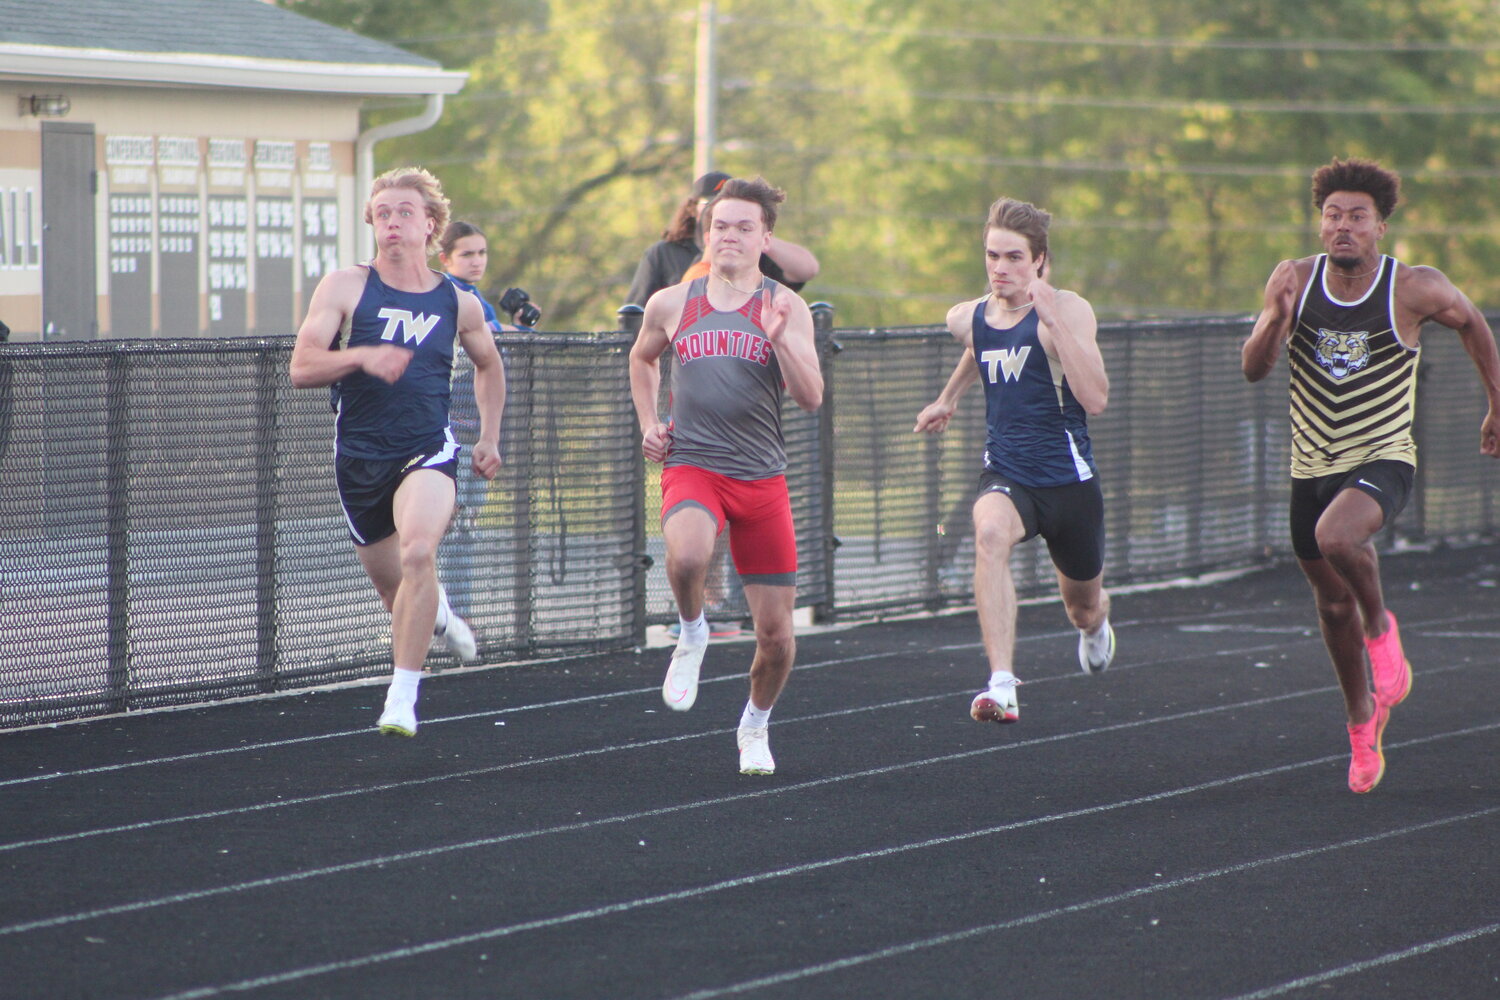 Southmont's Nolan Boyer races in the 100 meter dash. Boyer also was a member of the 4x400 team that were SAC champs.